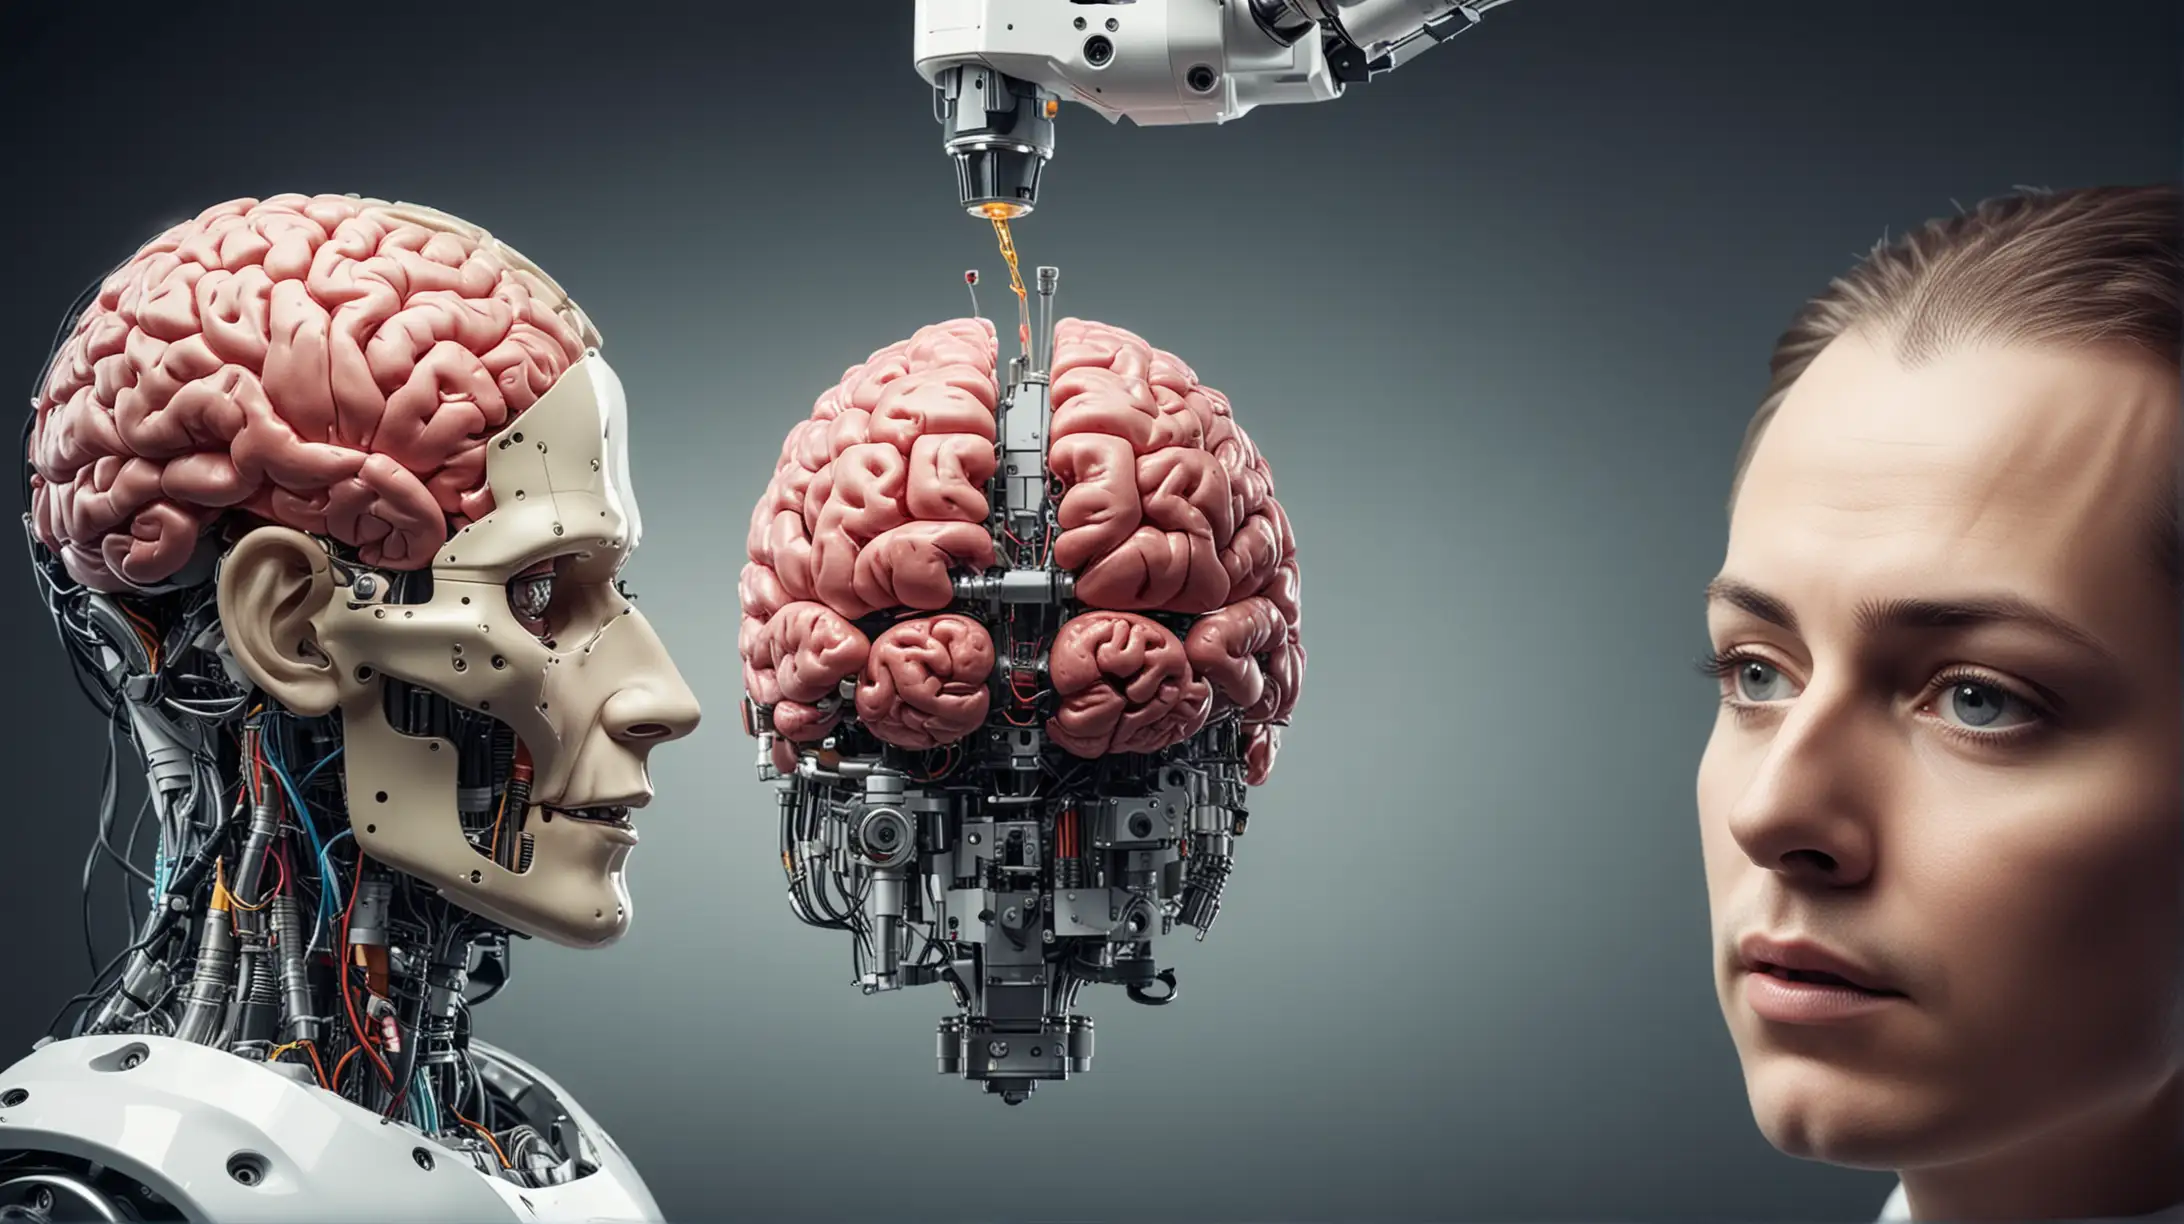 Scientists Manipulating Robot Head and Brain in Laboratory Experiment